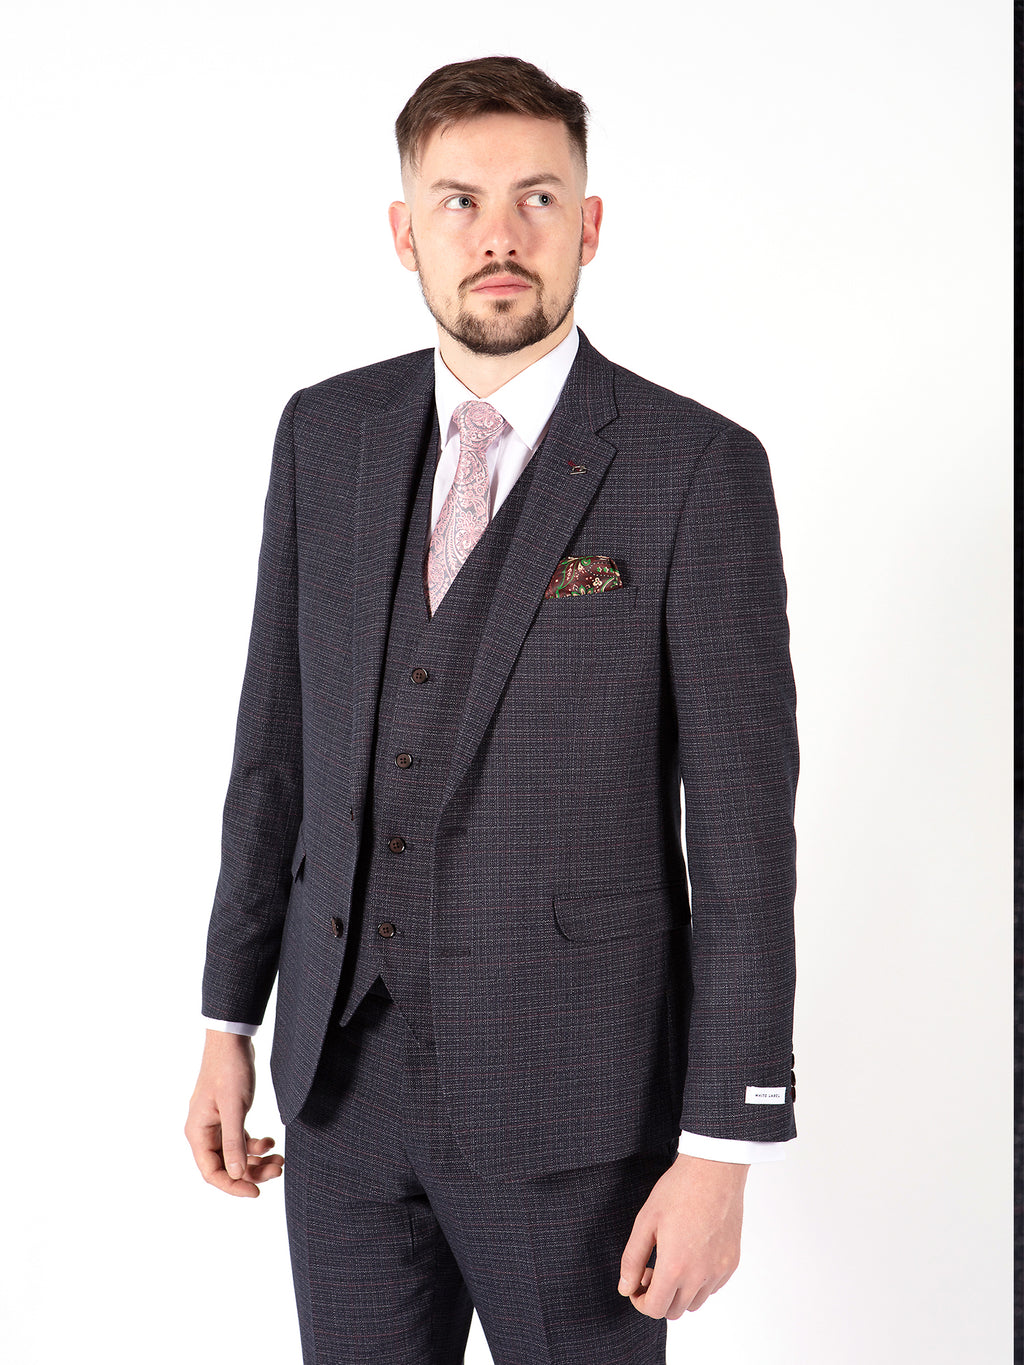 grey check suit